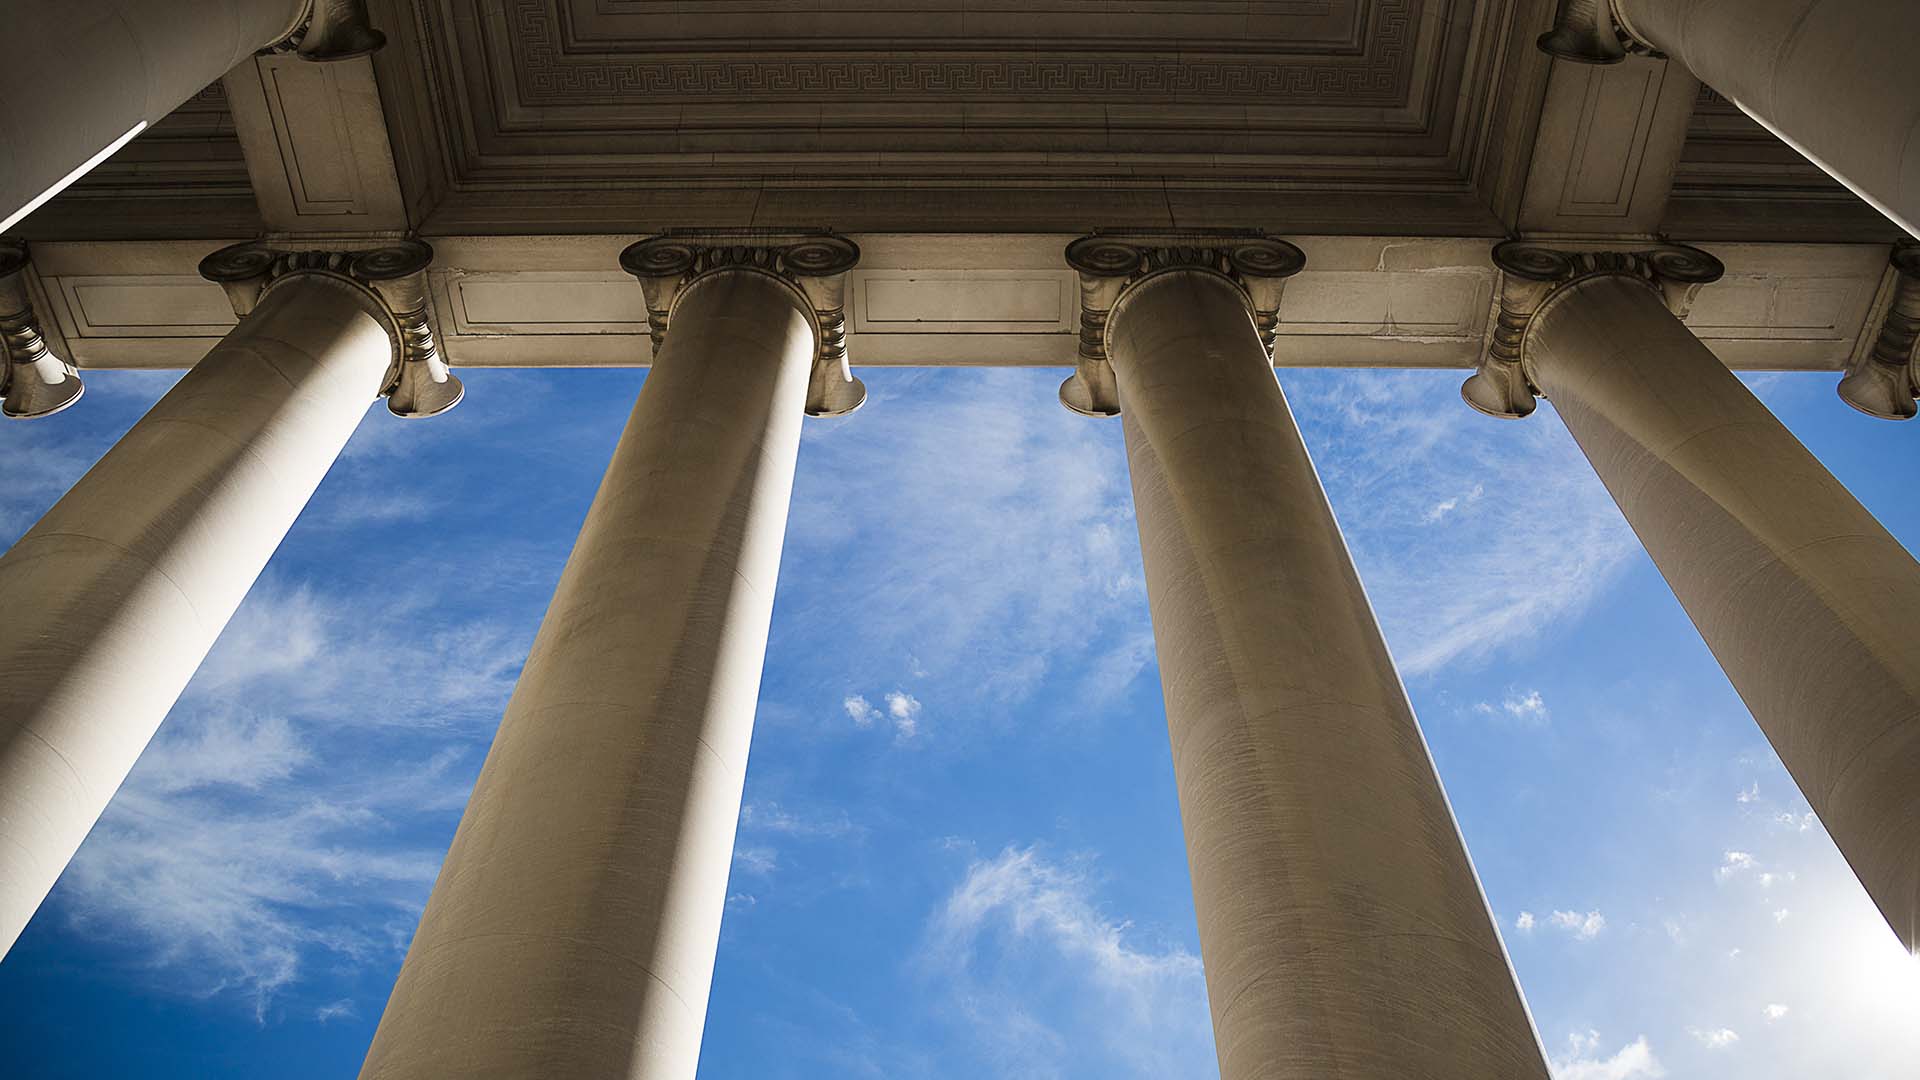 Court building's stone pillars viewed from below